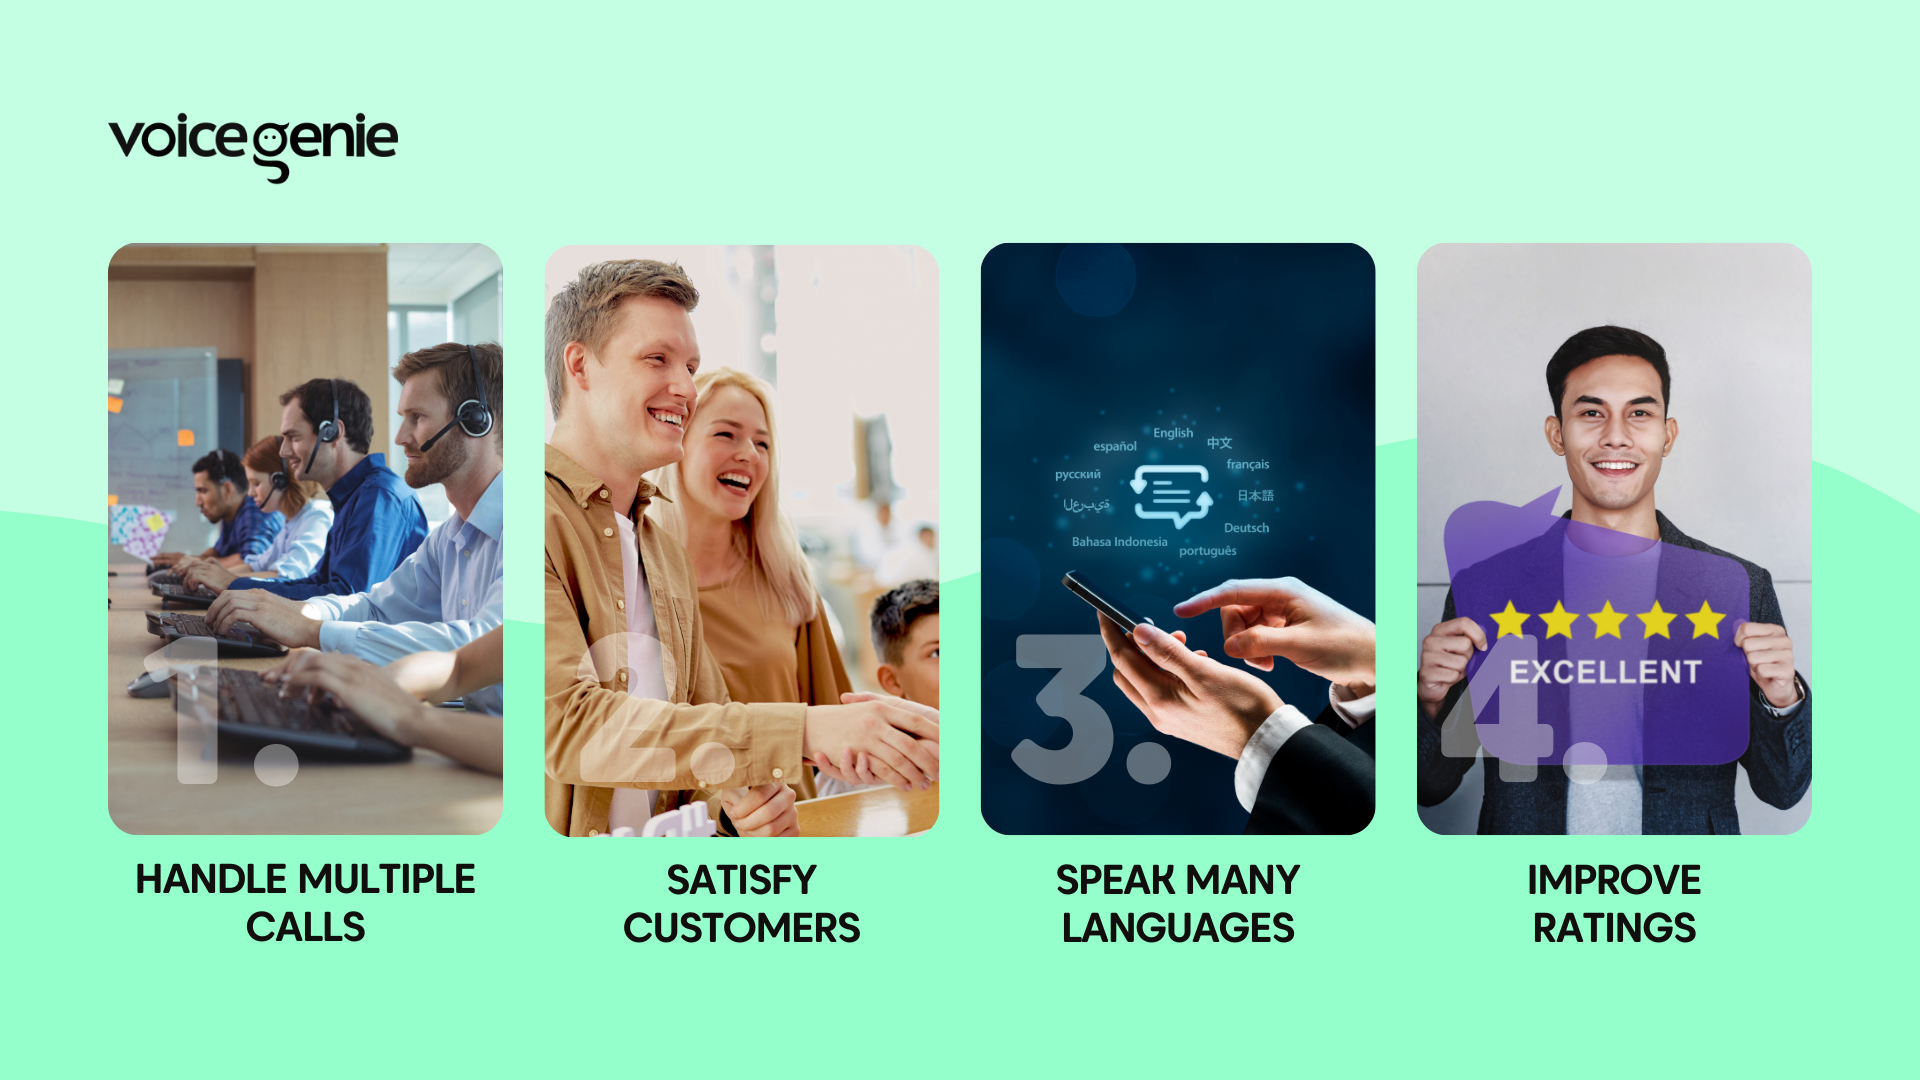 Benefits of Using a Voice bot like VoiceGenie for businesses